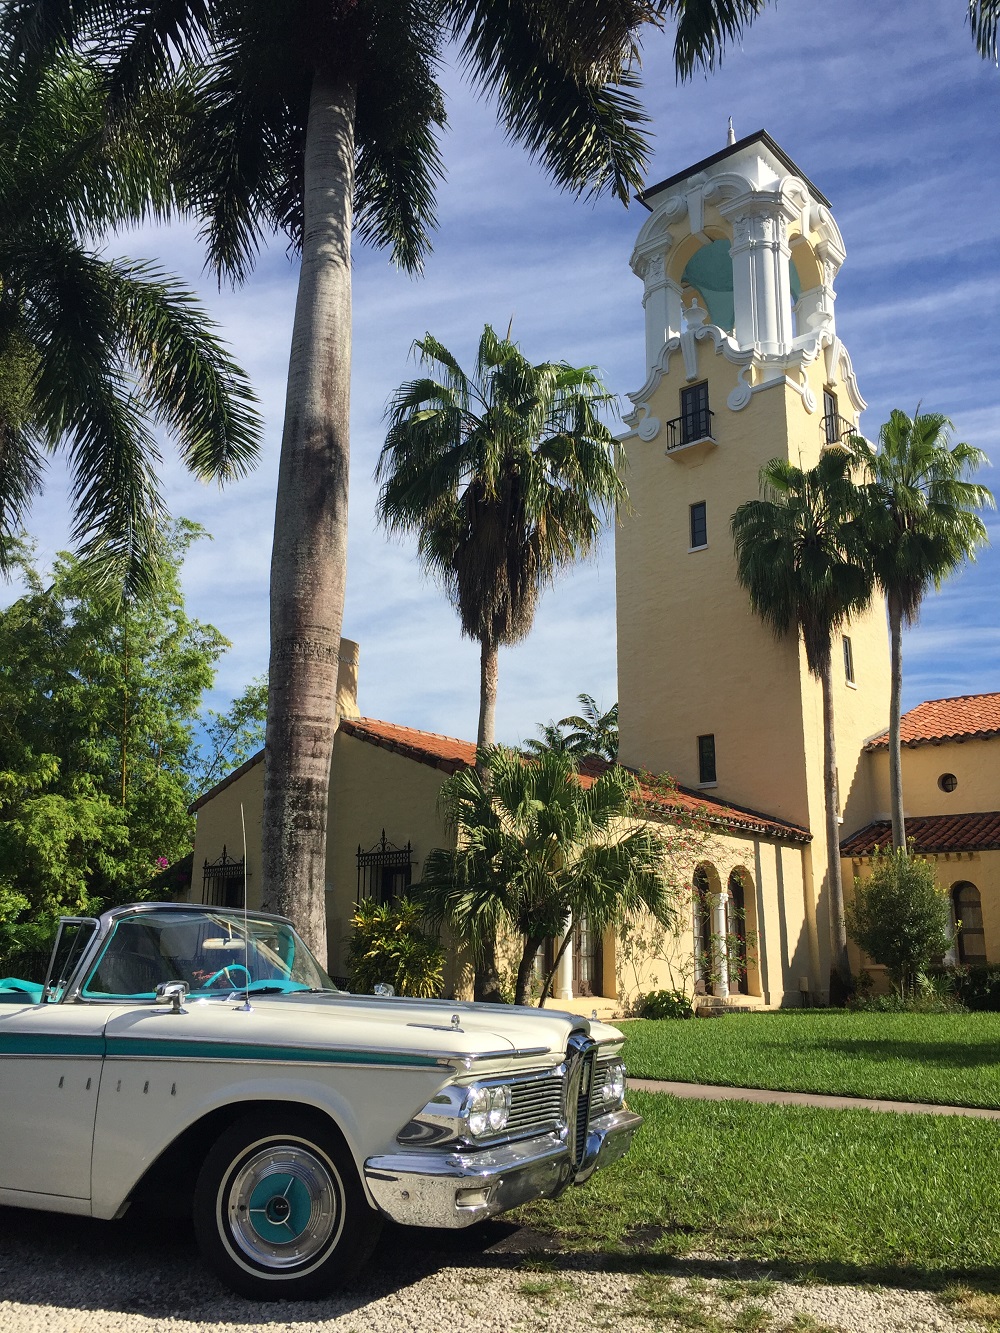 Explore Miami Touring and Sightseeing the City in Classic Car Tours in Convertible